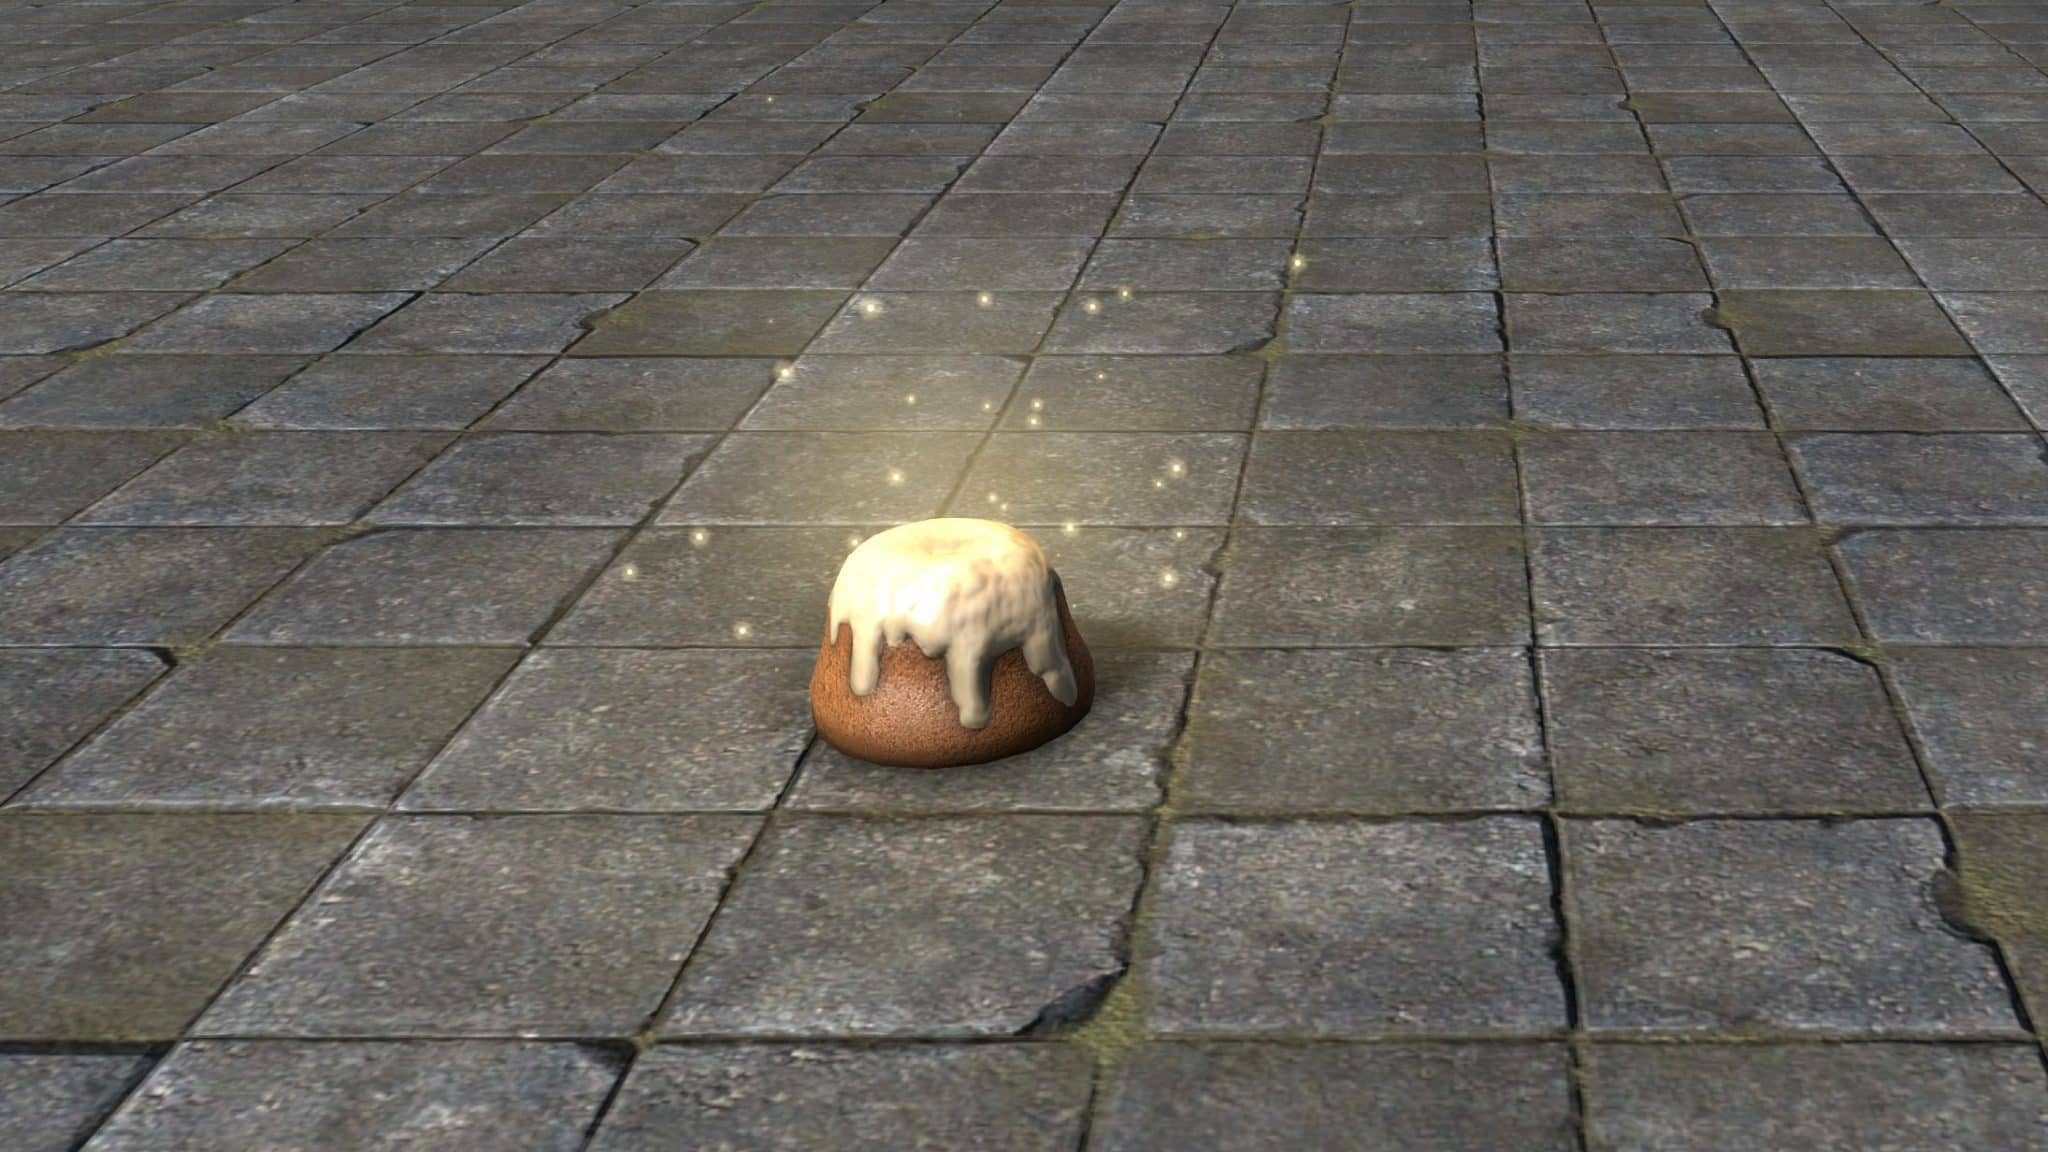 the-elder-scrolls-online-scalecaller-crown-crate-apex-consumable-resplendent-sweetroll-4660488